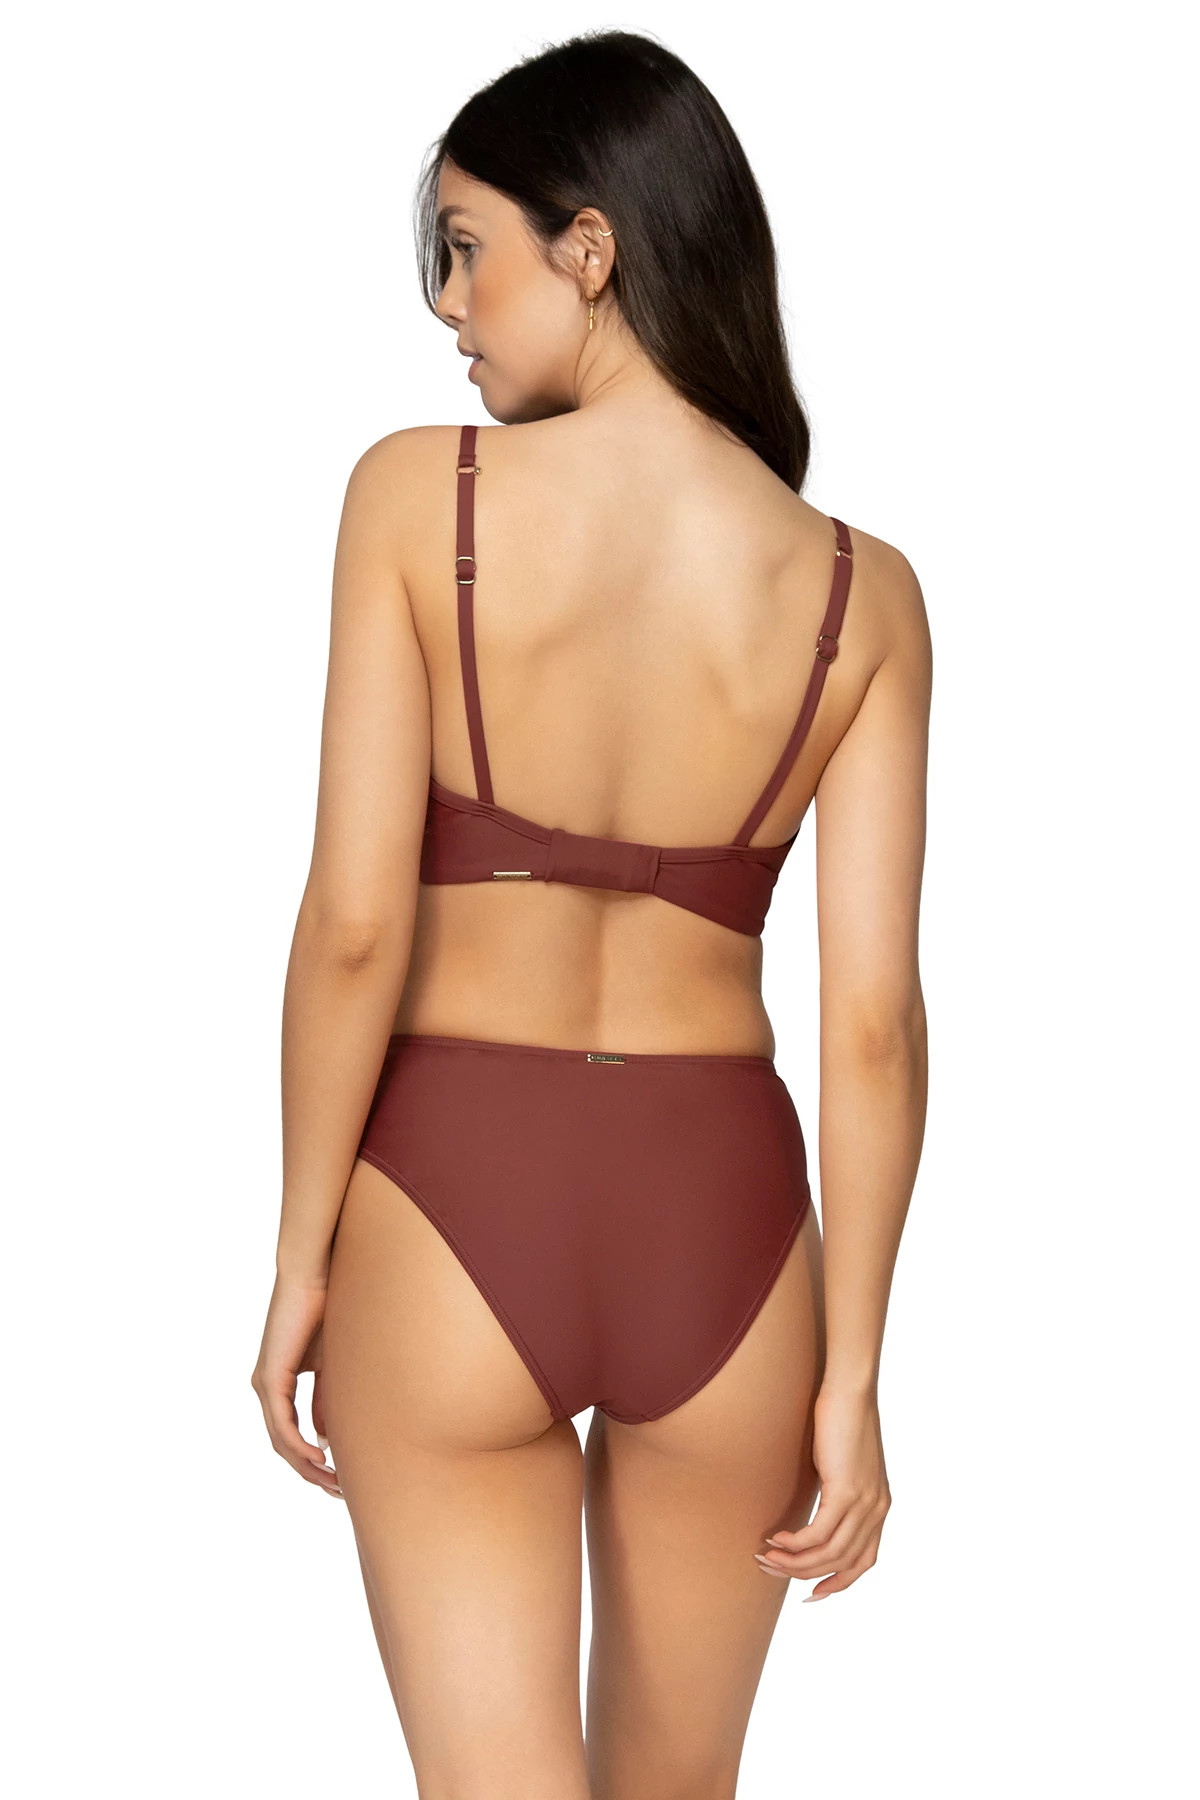 TUSCAN RED Crossroads Underwire Bikini Top (D+ Cup) image number 3